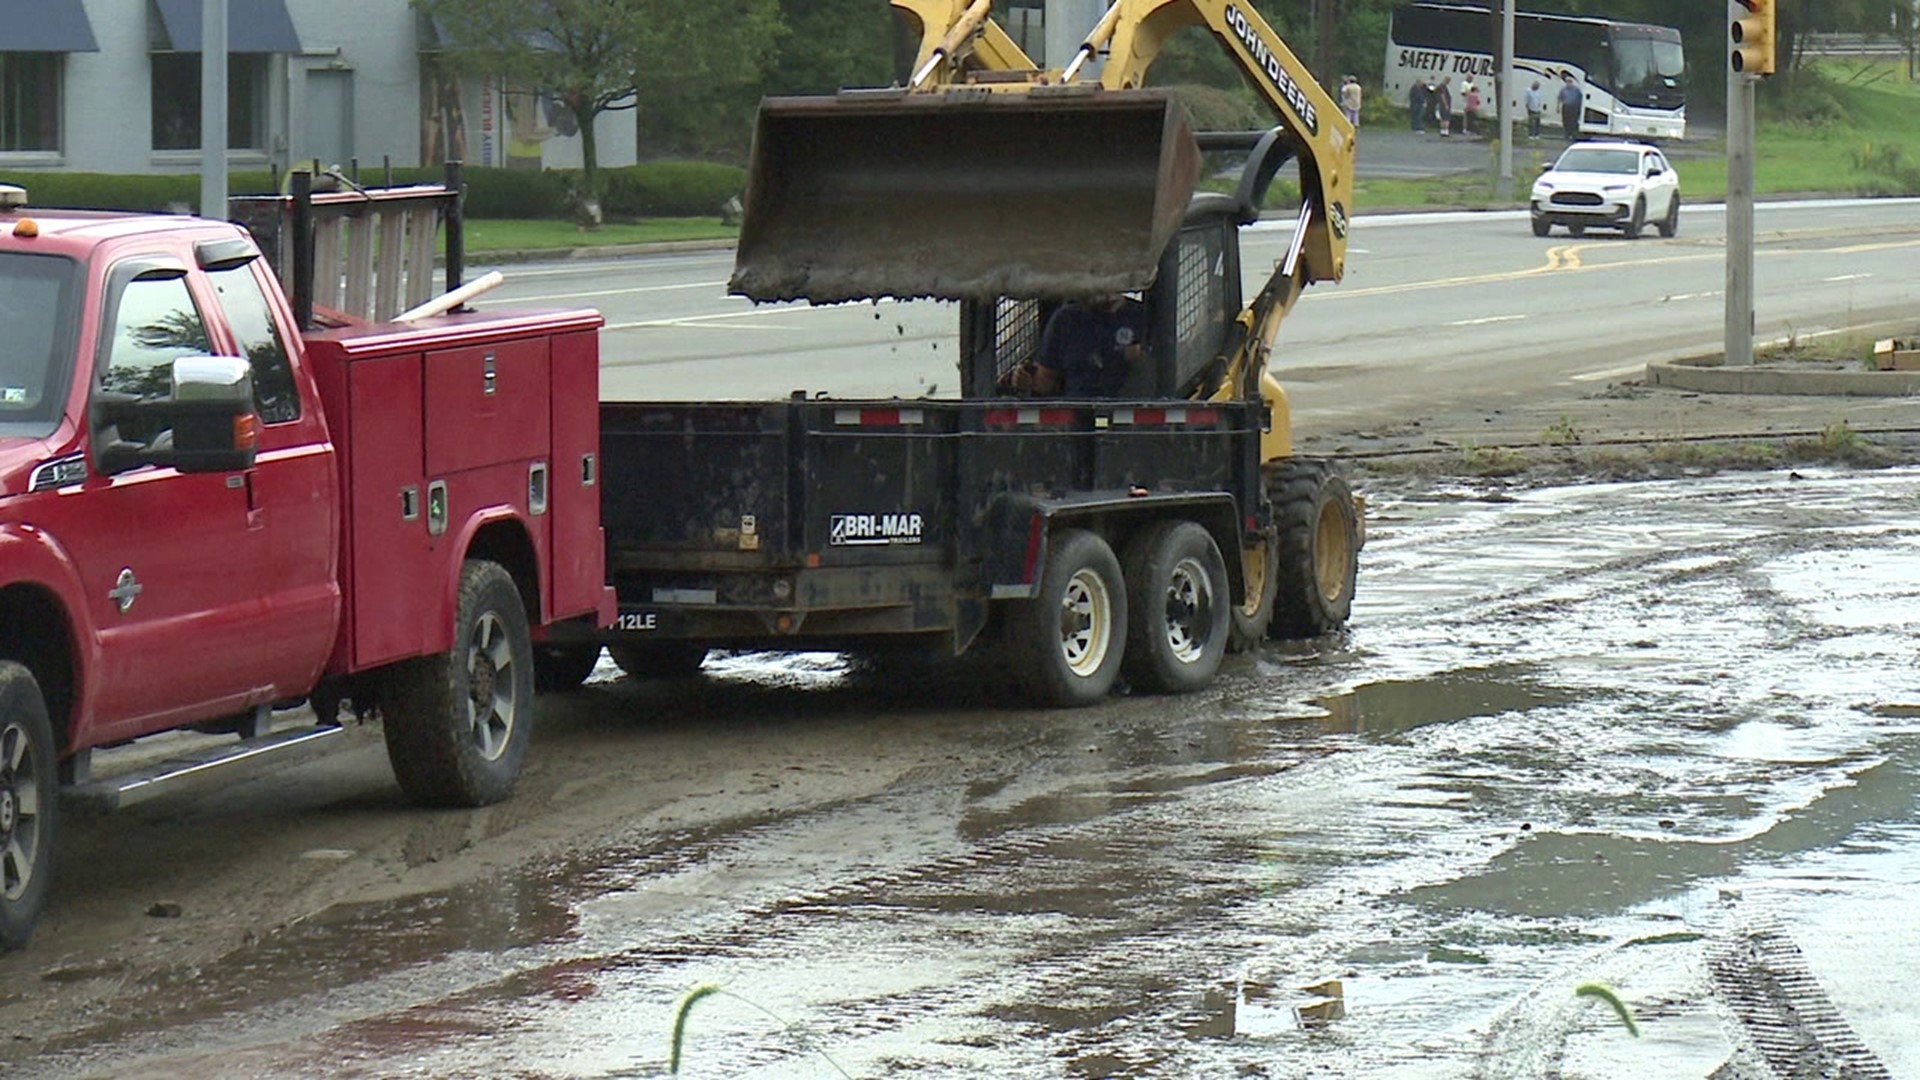 Crews spent Sunday cleaning up after several areas saw severe flash flooding Saturday night, leaving many trapped in their cars.